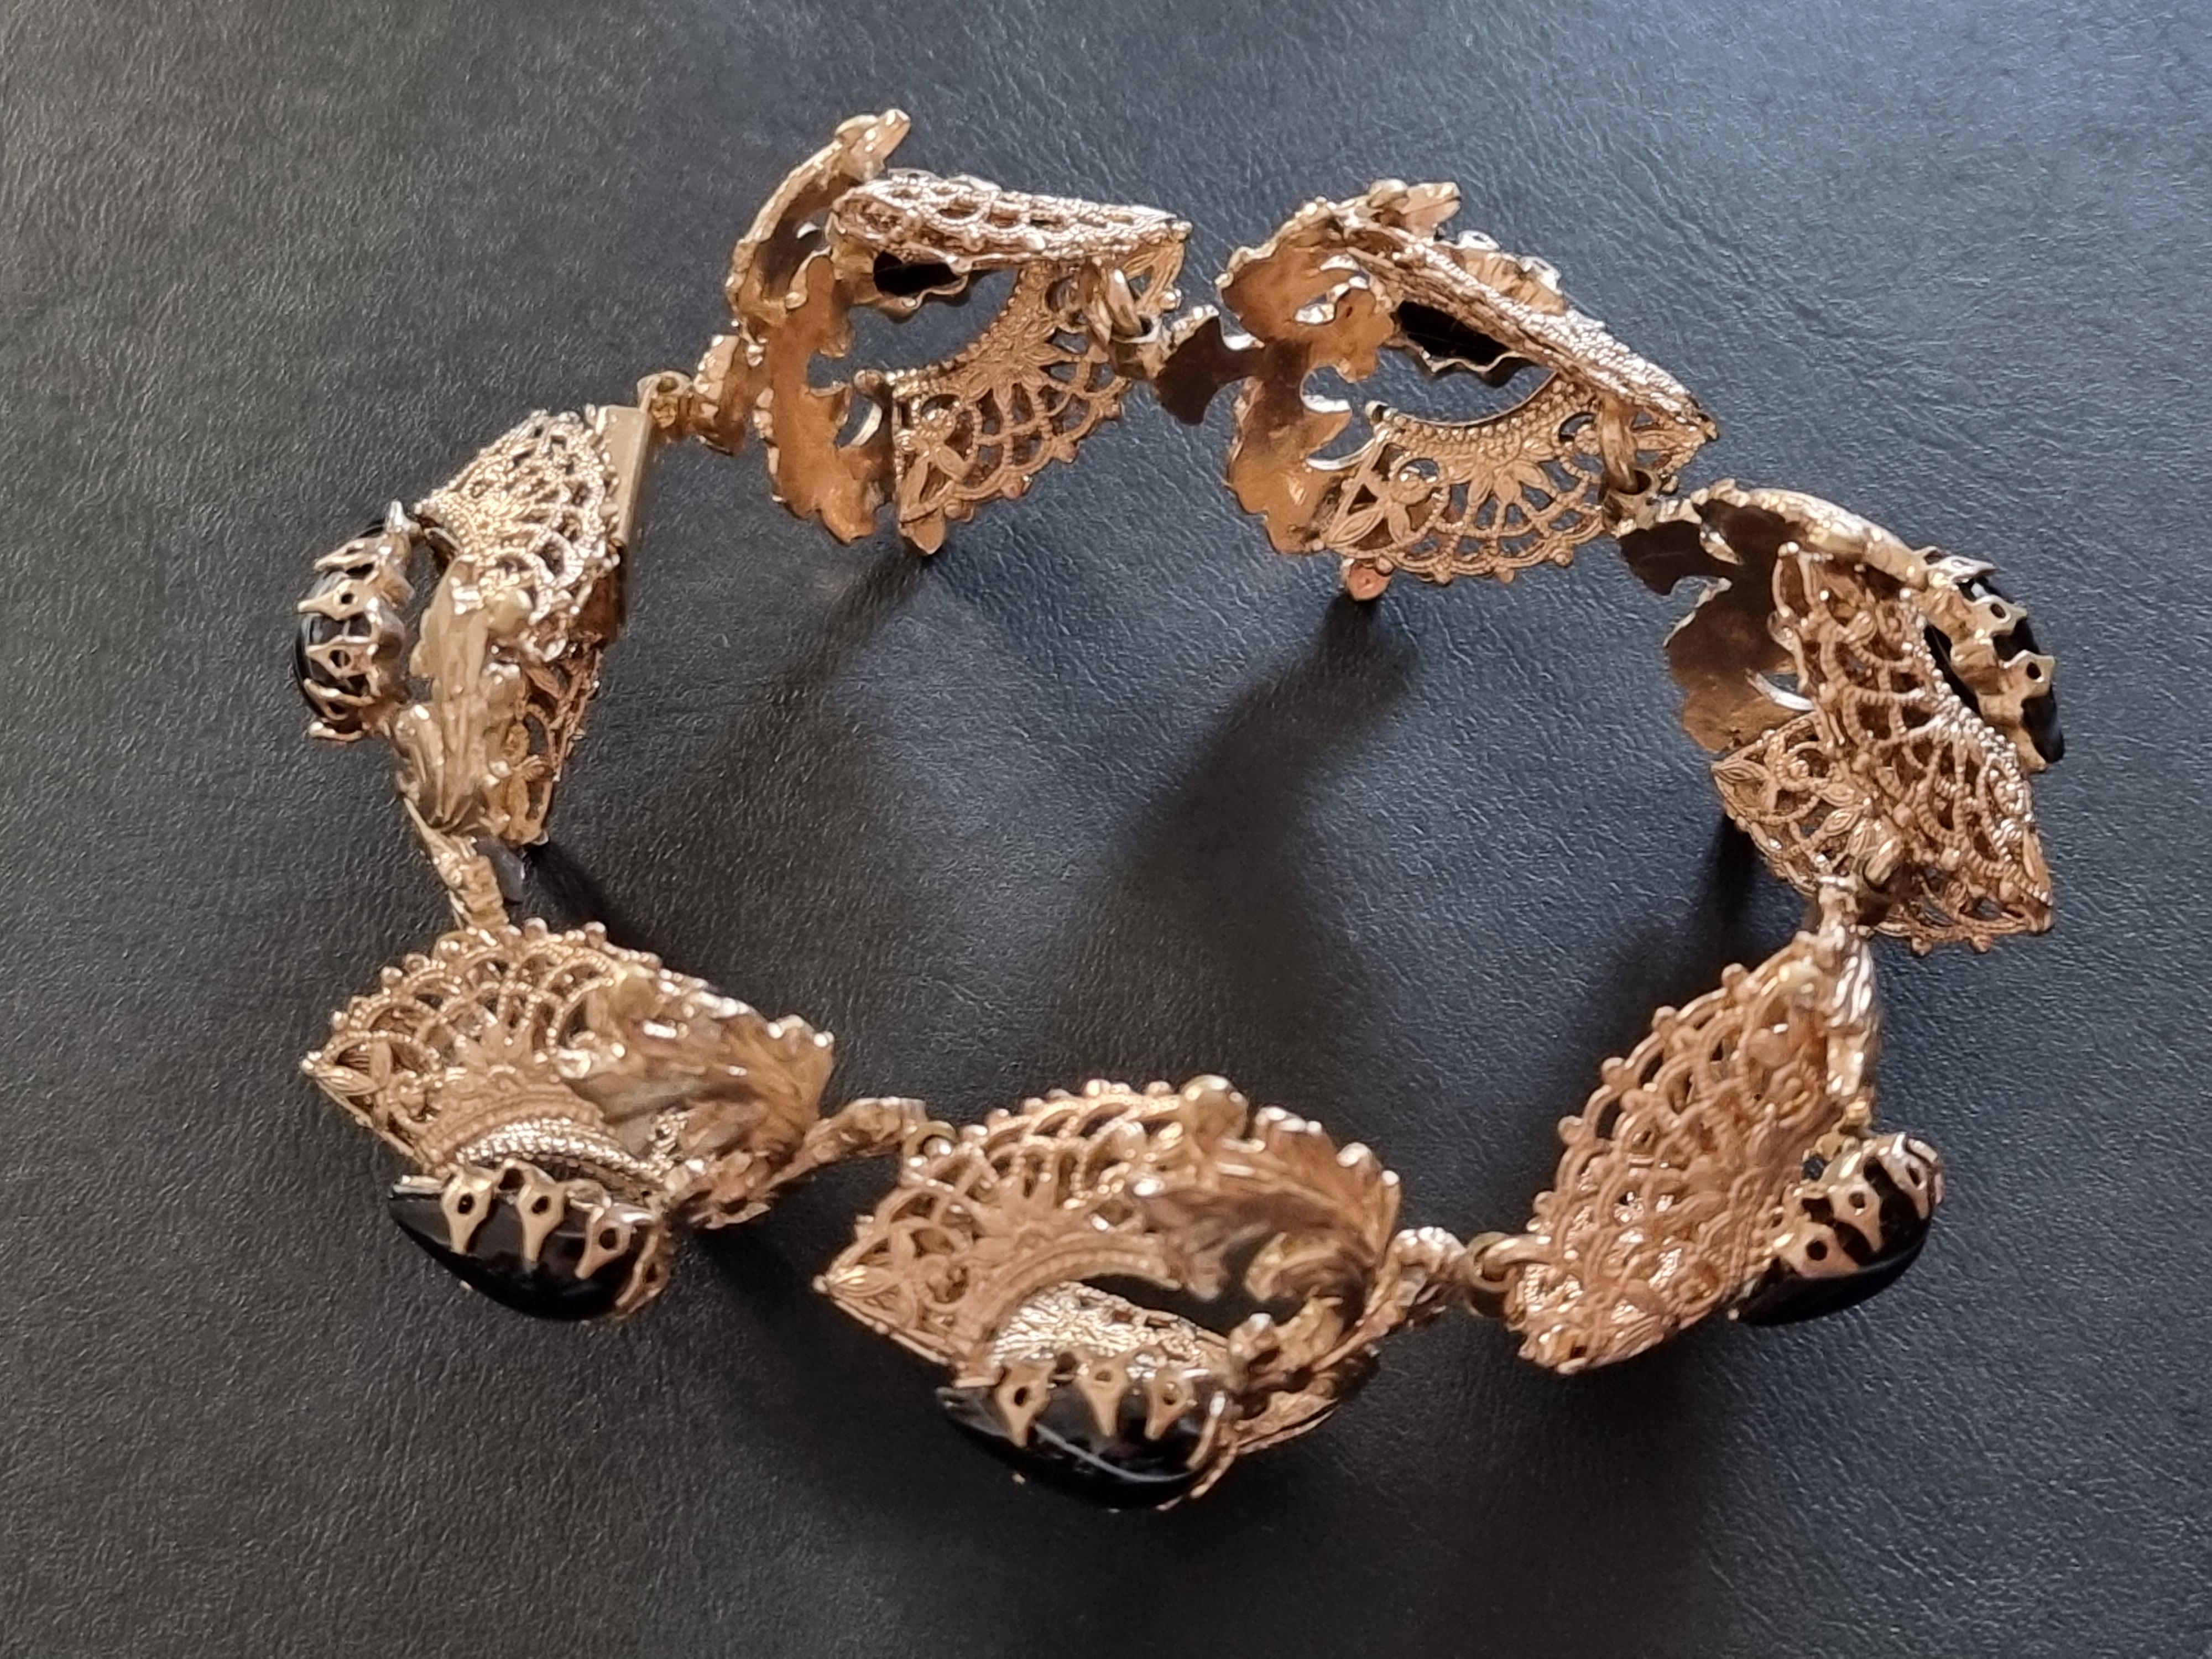 Magnificent old BRACELET,
vintage from the 50s,
signed GM - Giuliano FRATTI Milan,
famous designer worked for Dior and Chanel in the 50s,
extraordinary work,
width 3 cm, length 20 cm,
very good state.

Giuliano Fratti, Milan 1906 - 1992, was based